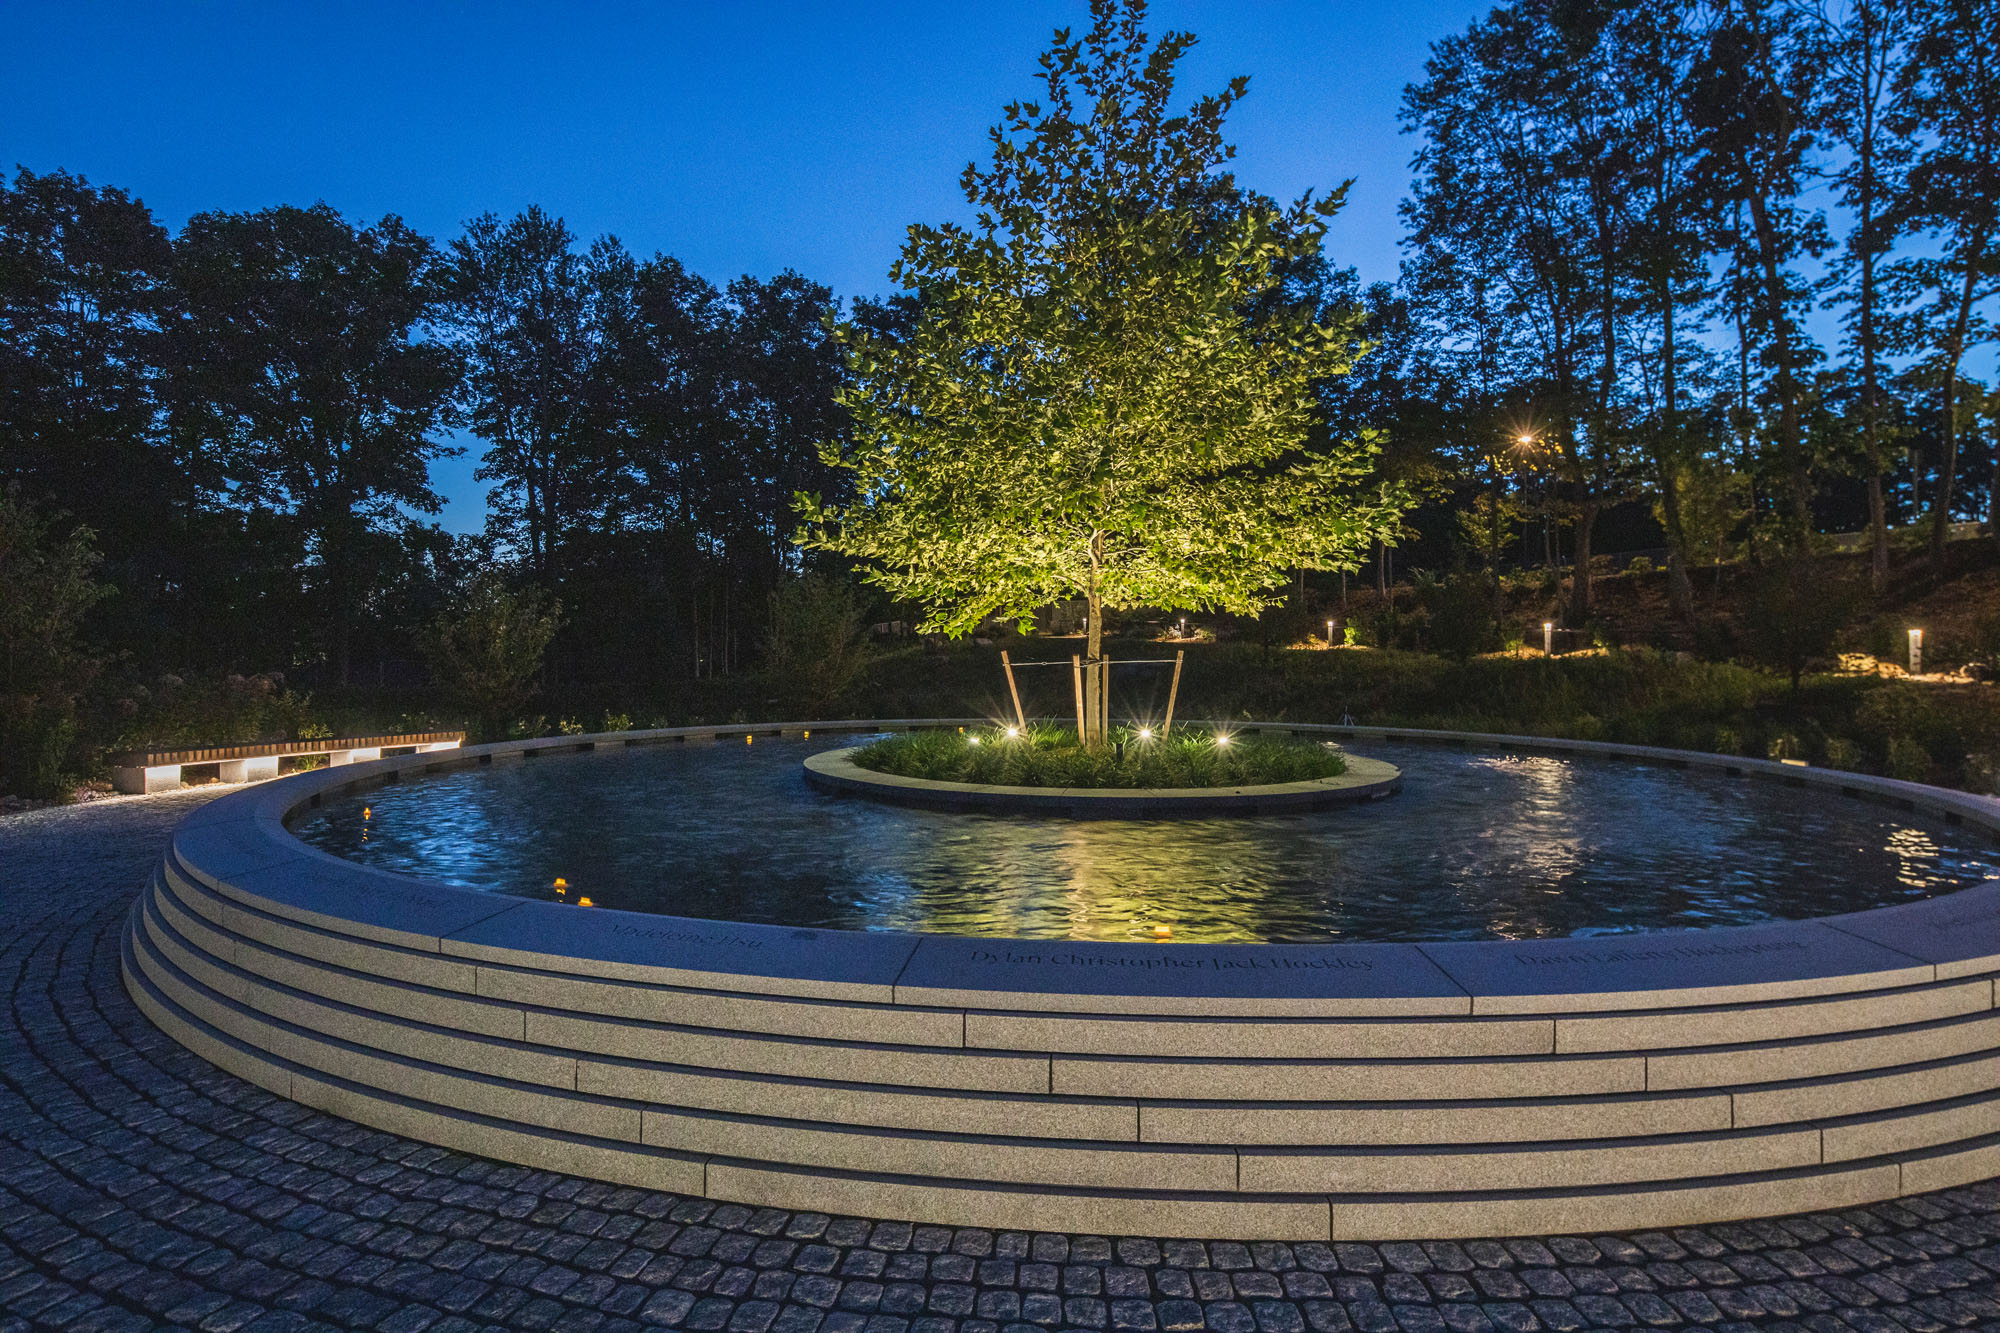 evening photograph of a circular fountain with a tree at its center